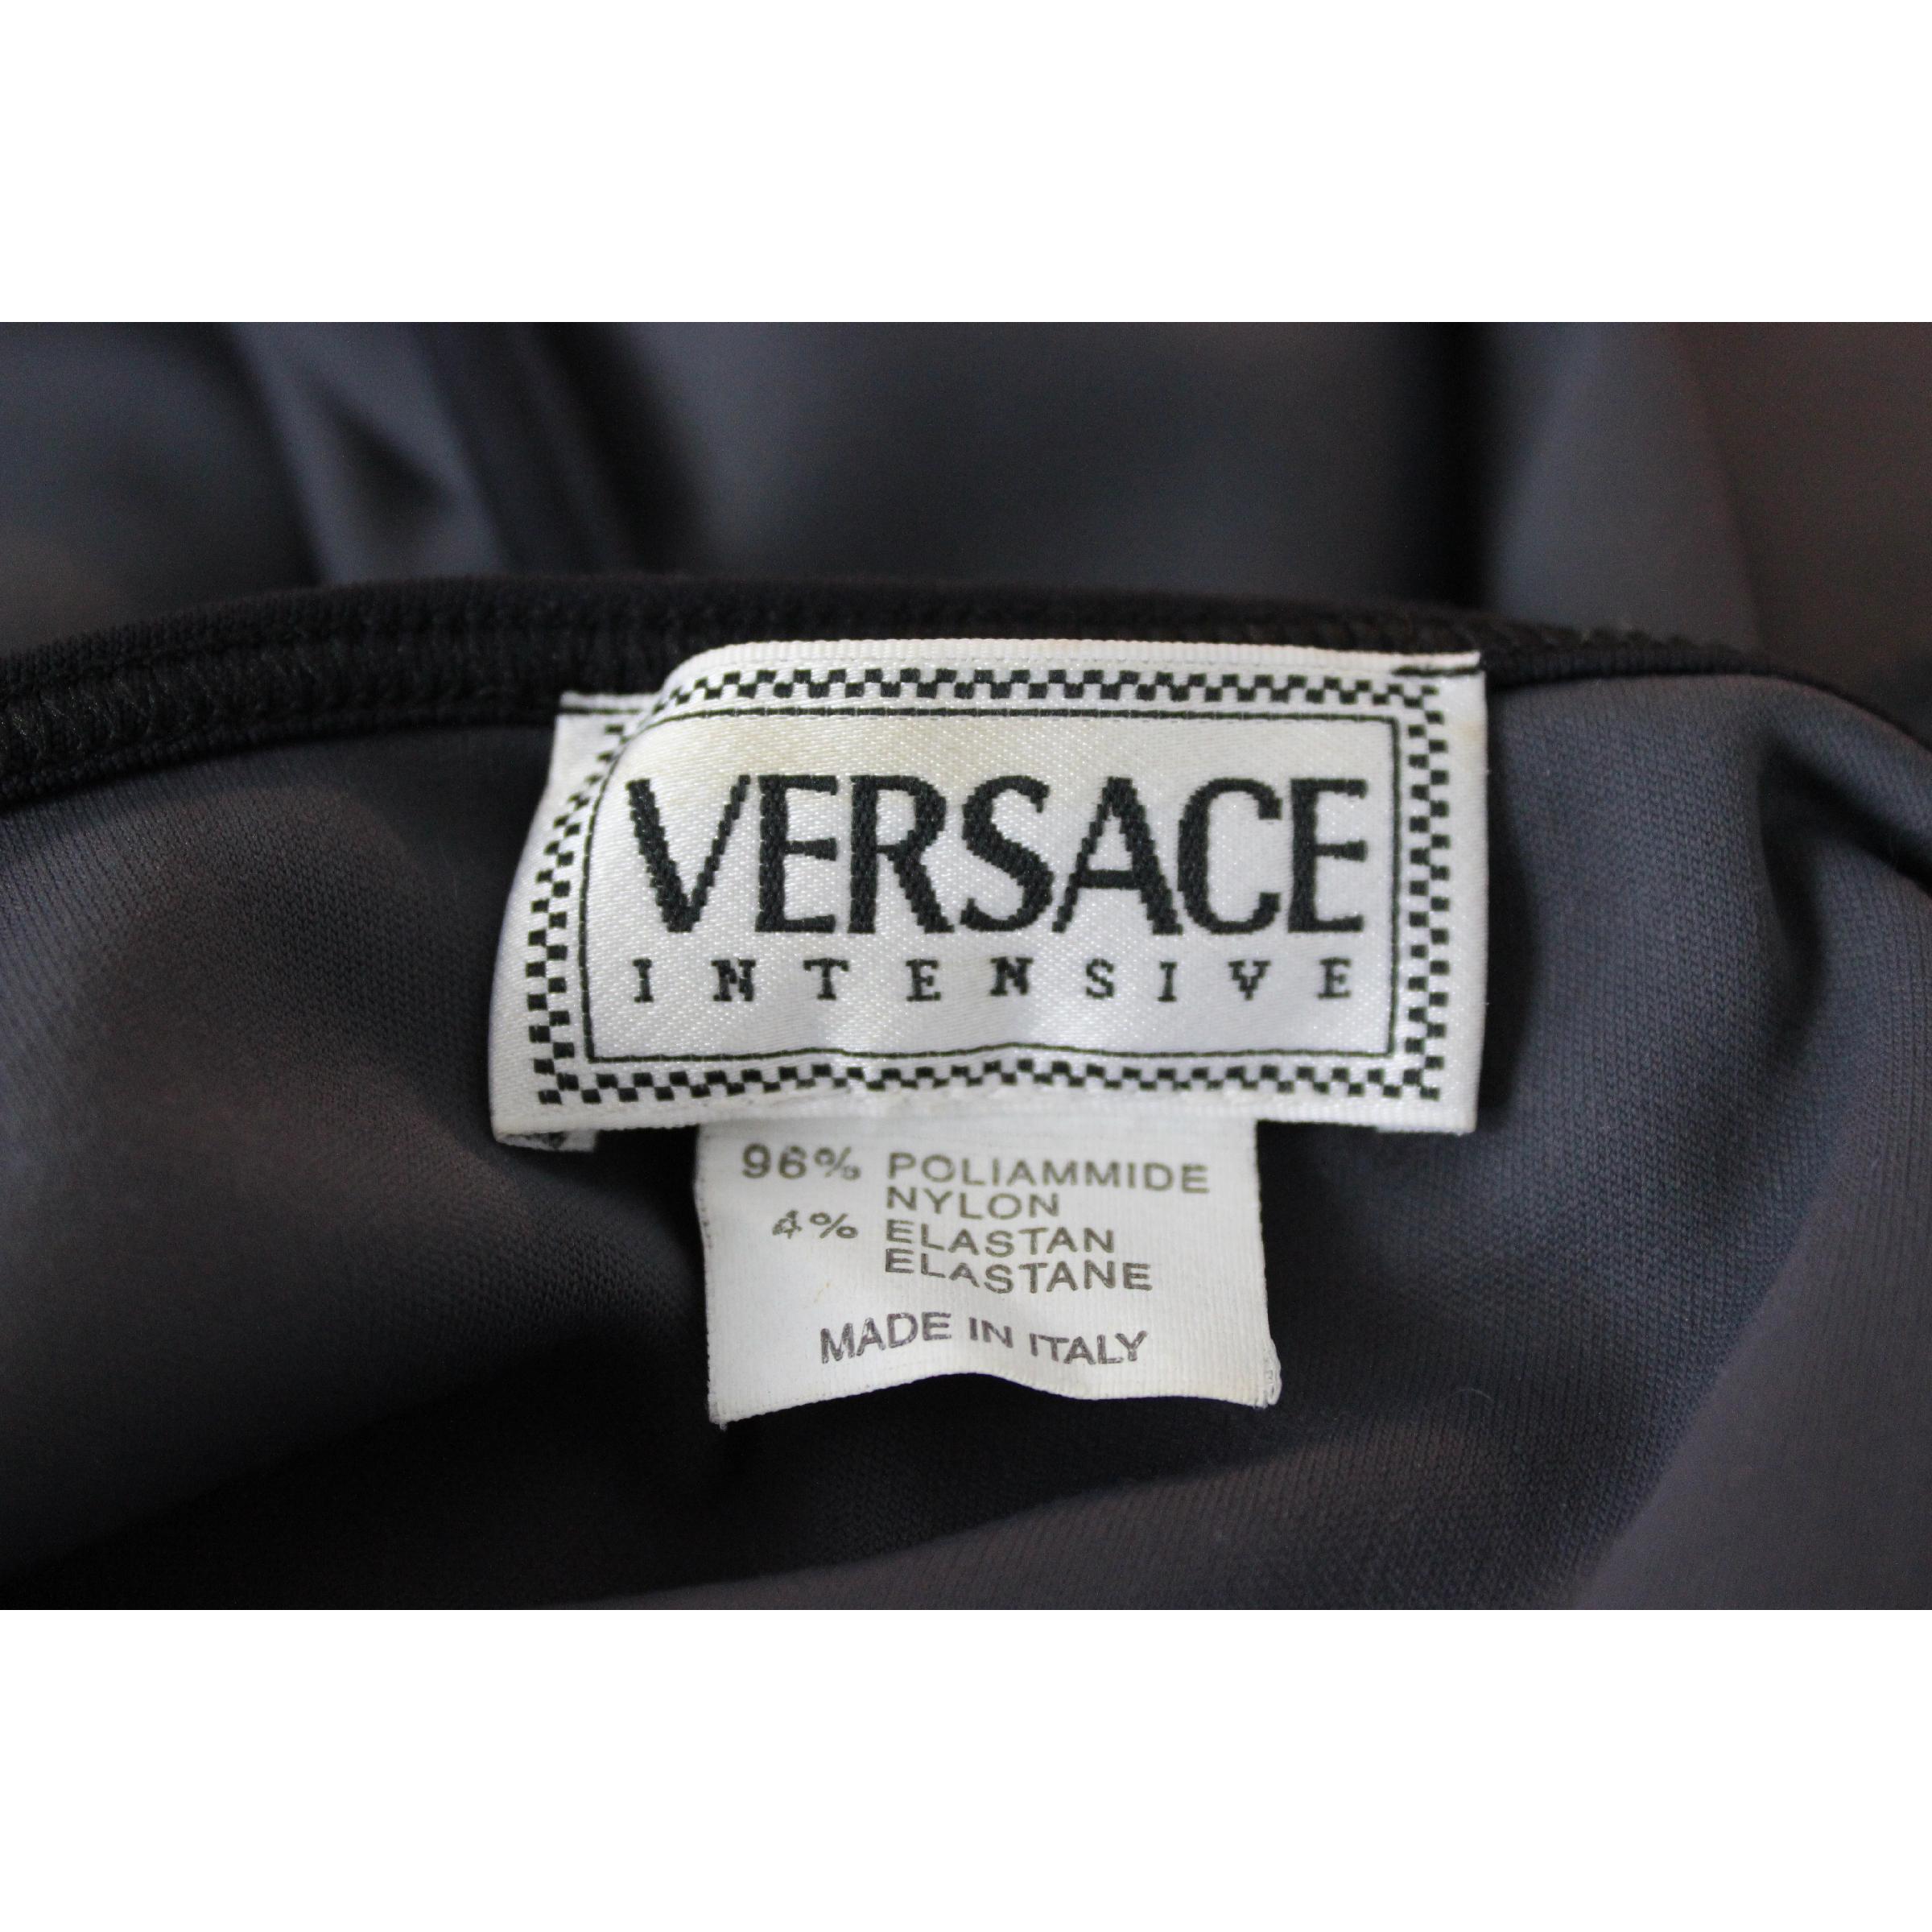 1990s Gianni Versace Intensive Gray Off The Shoulder Sheath Dress 2